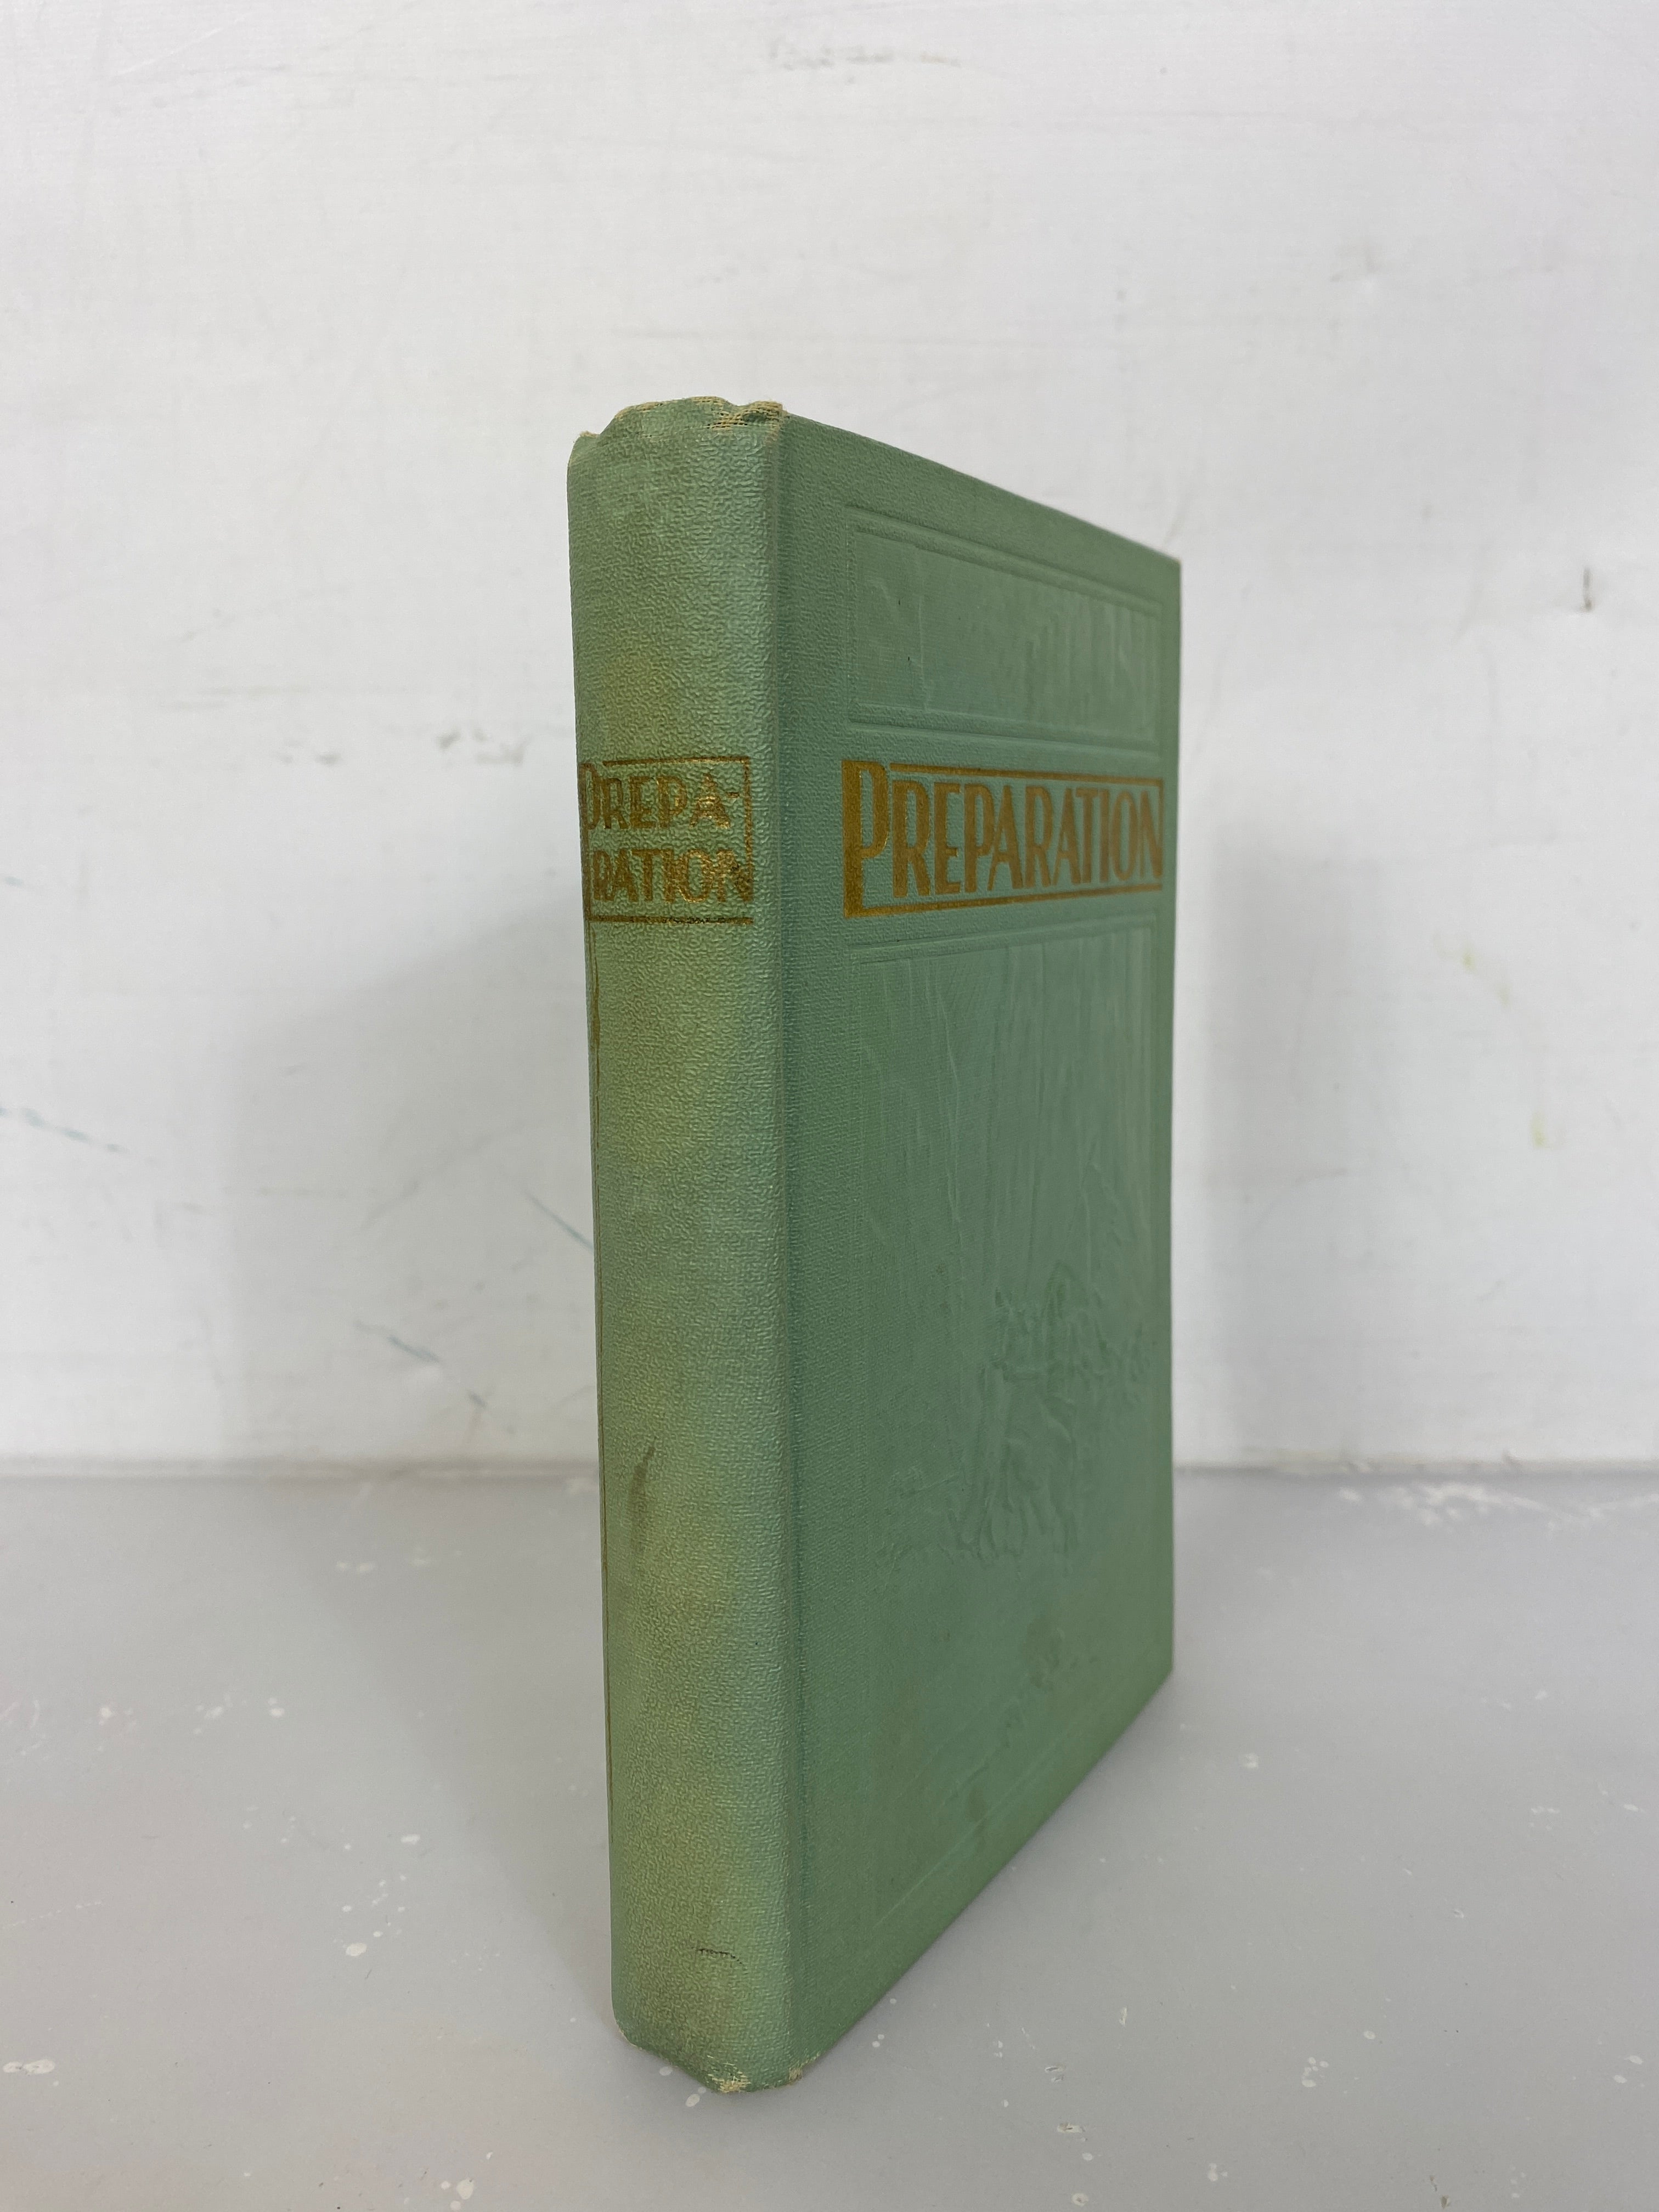 Watch Tower Preparation J.F. Rutherford 1933 First Printing HC